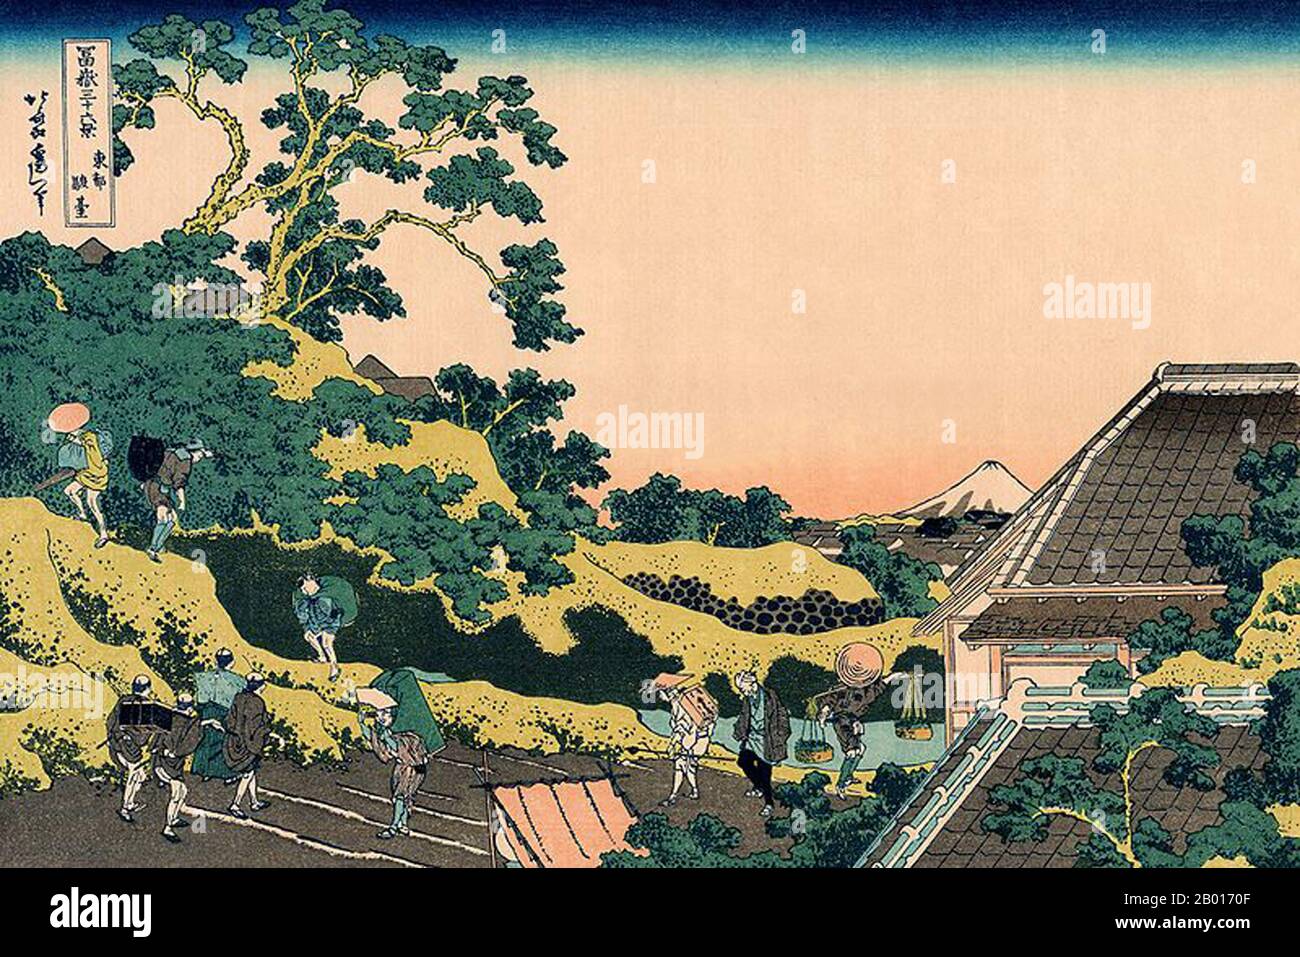 Japan: ‘Sundai, Edo’, also known as ‘Fuji Seen from Mishima Pass’. Ukiyo-e woodblock print from the series 'Thirty-six Views of Mount Fuji' by Katsushika Hokusai (31 October 1760 - 10 May 1849), c. 1830.  Mount Fuji is the highest mountain in Japan at 3,776.24 m (12,389 ft). An active stratovolcano that last erupted in 1707–08, Mount Fuji lies about 100 km southwest of Tokyo. Mount Fuji's exceptionally symmetrical cone is a well-known symbol and icon of Japan and is frequently depicted in art and photographs. It is one of Japan's ‘Three Holy Mountains’ along with Mount Tate and Mount Haku. Stock Photo